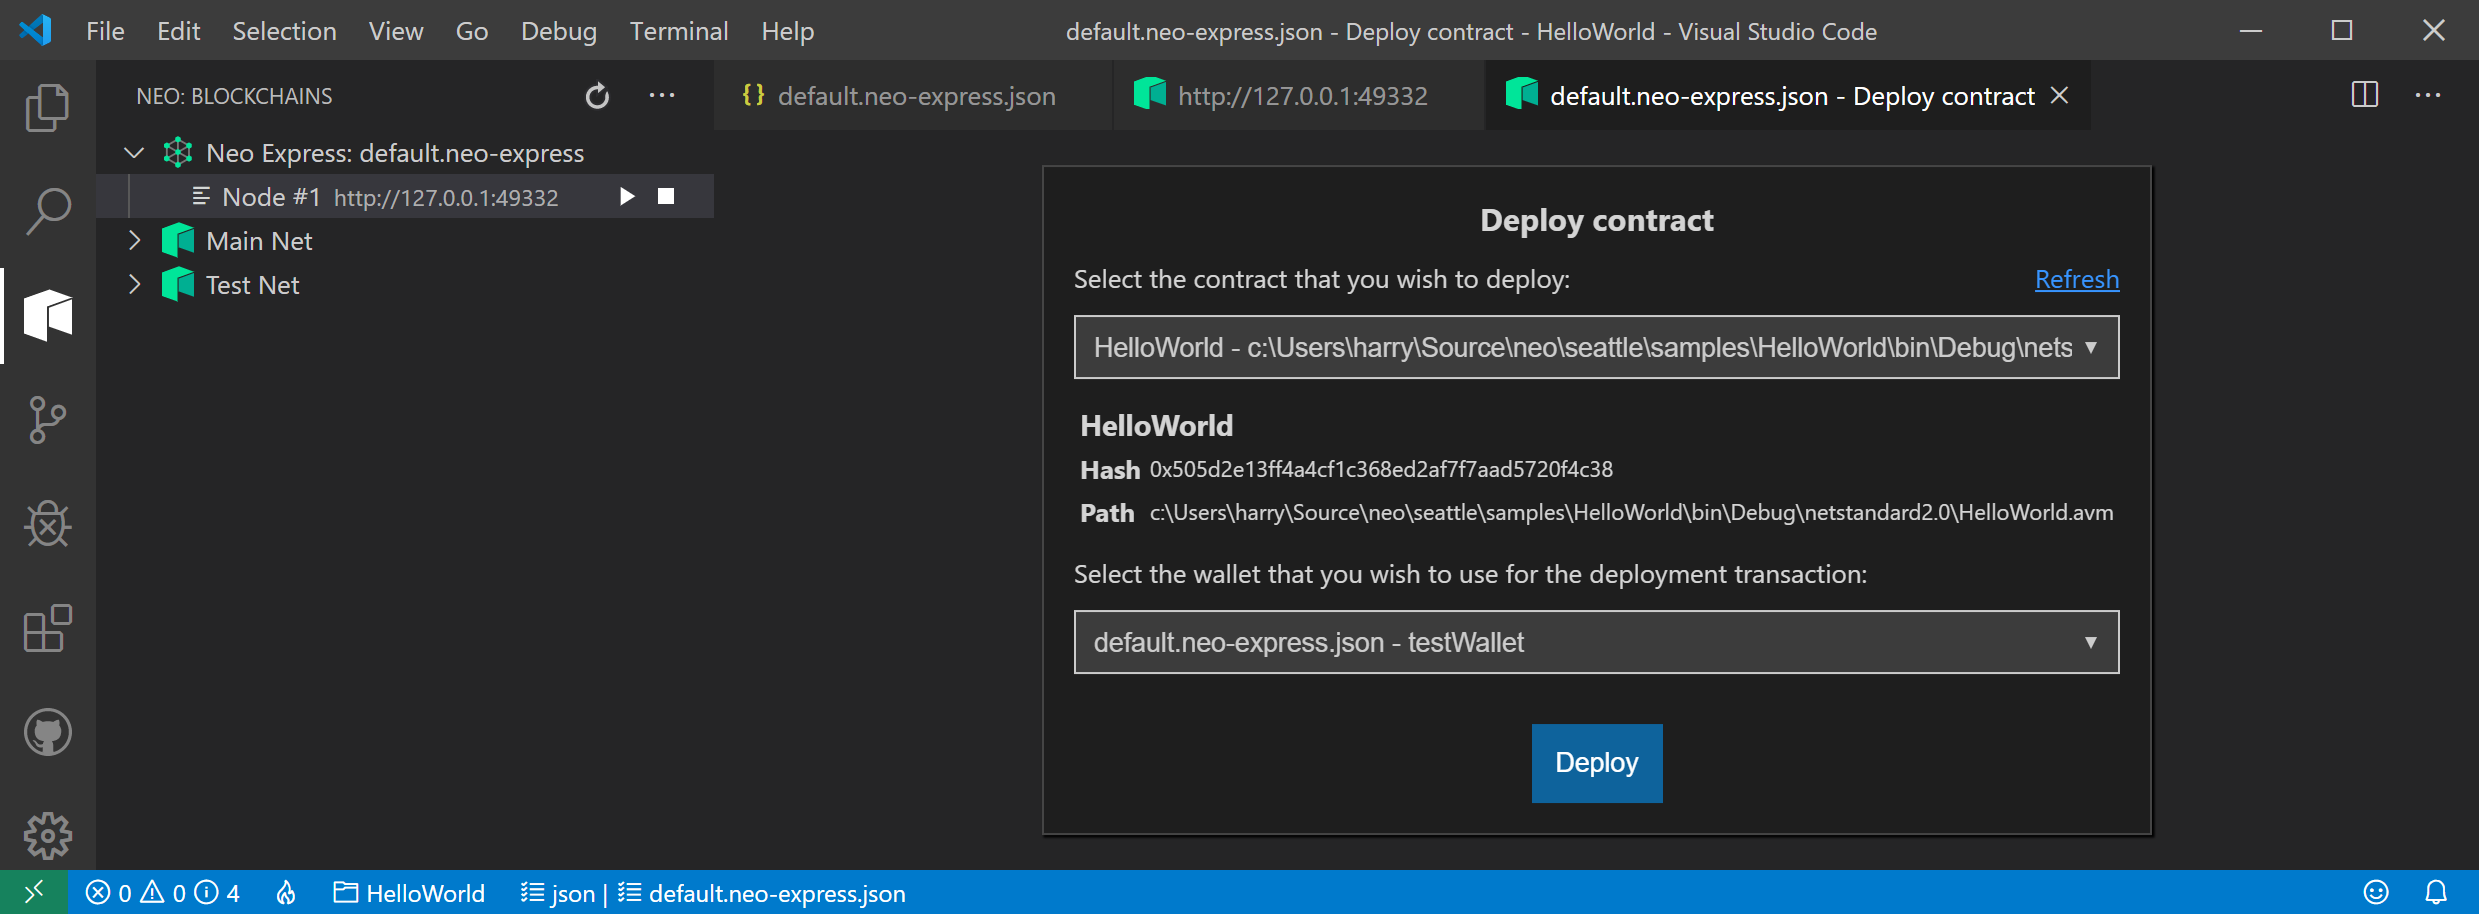 Deploy Contract Panel